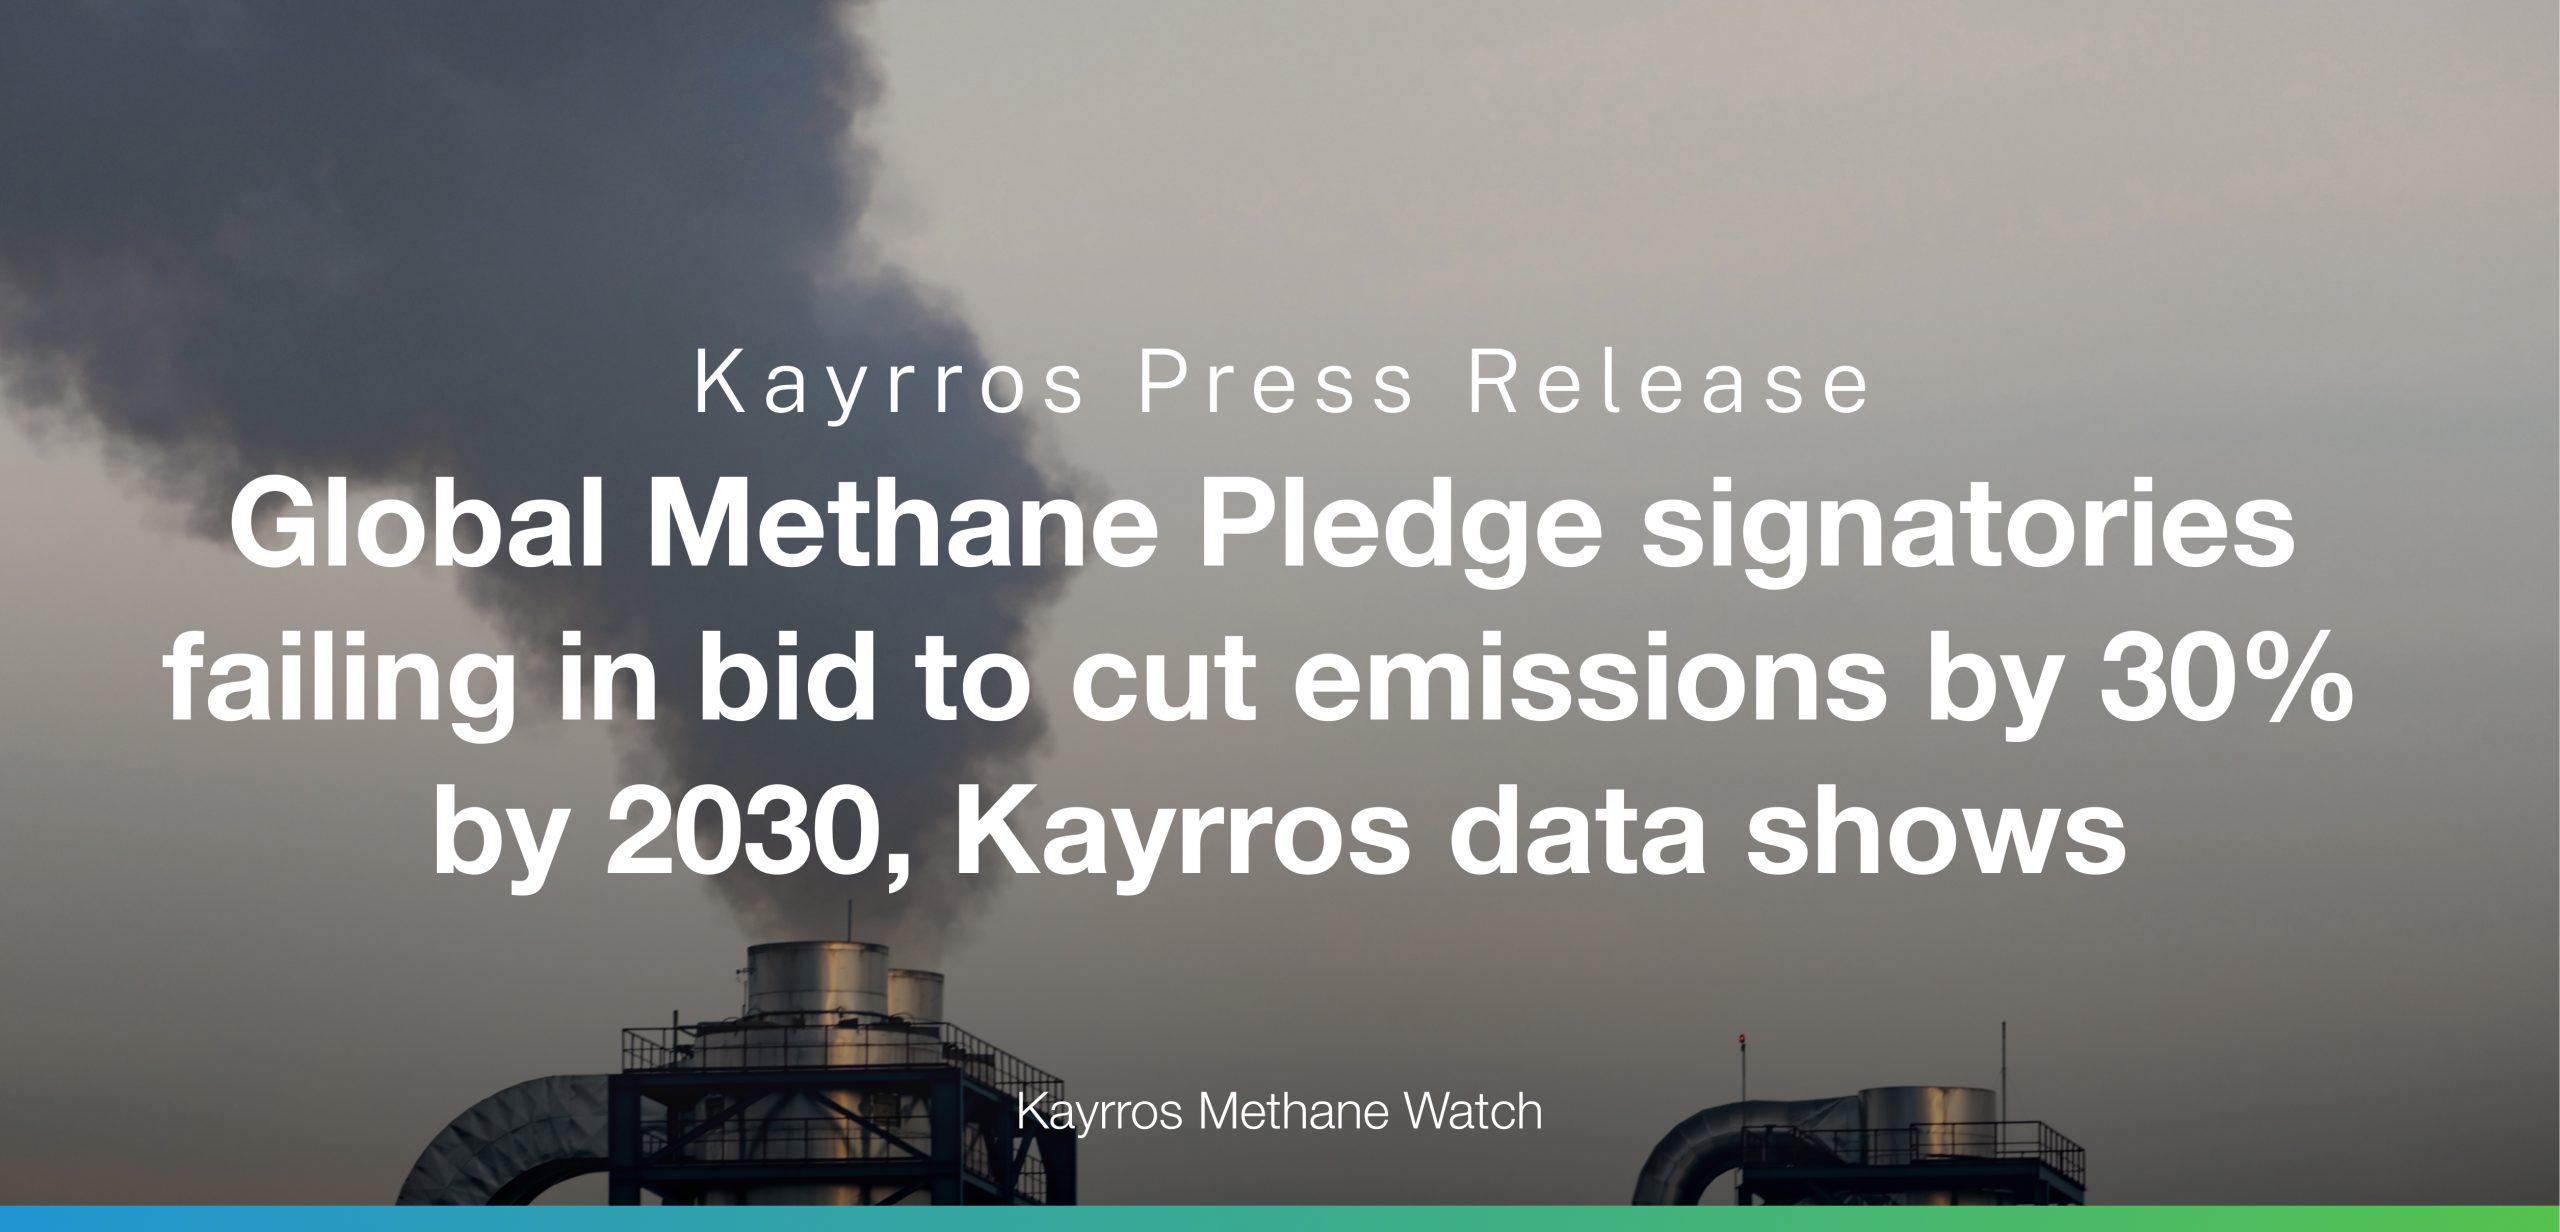 Global Methane Pledge signatories failing in bid to cut emissions by 30% by 2030, Kayrros data shows